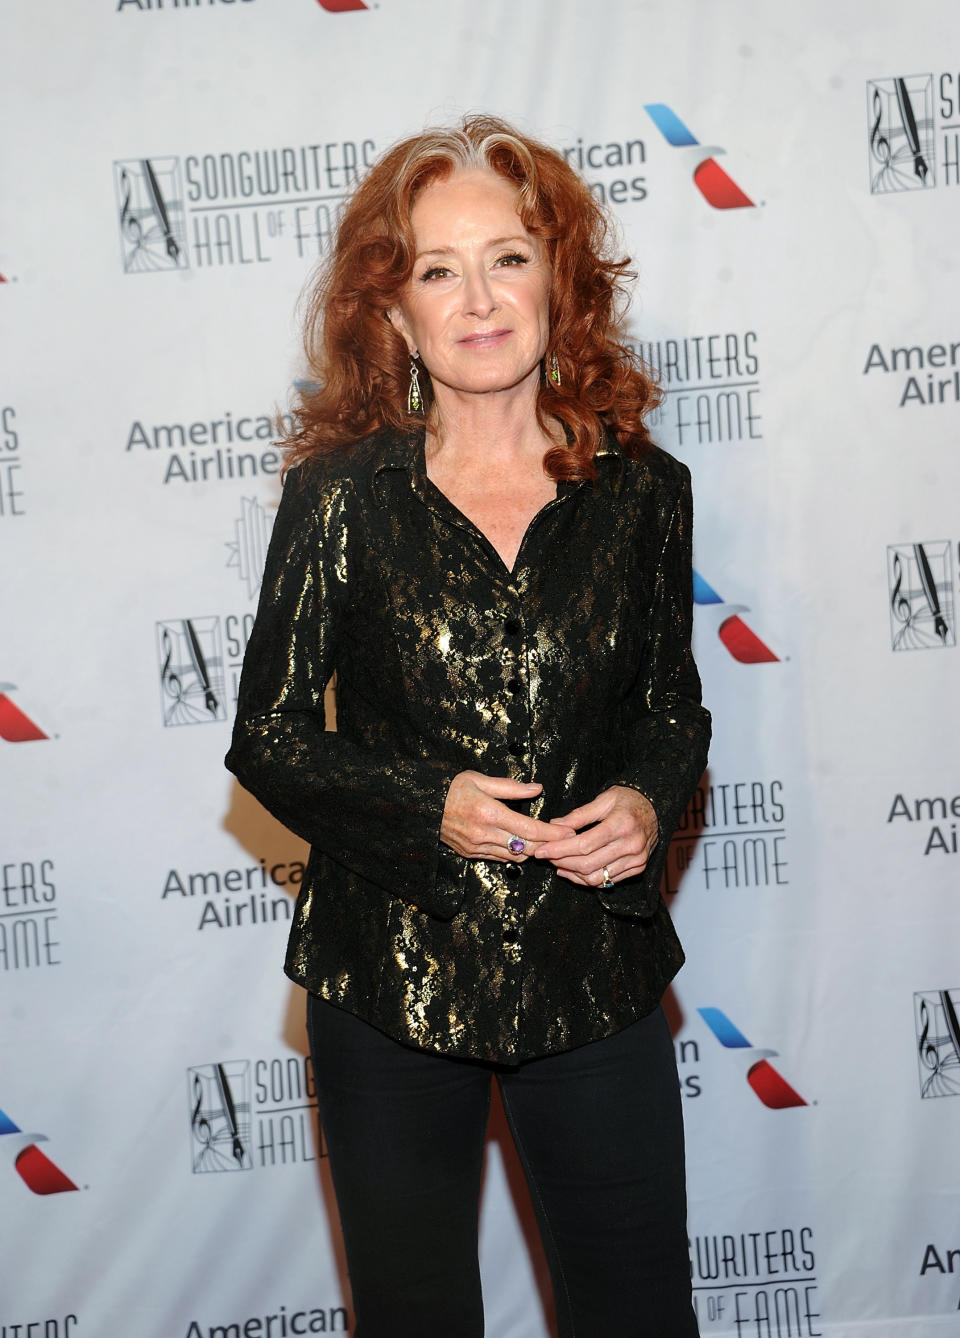 Bonnie Raitt arrives for the 50th annual Songwriters Hall of Fame induction and awards ceremony Thursday, June 13, 2019, in New York. (Photo by Brad Barket/Invision/AP)